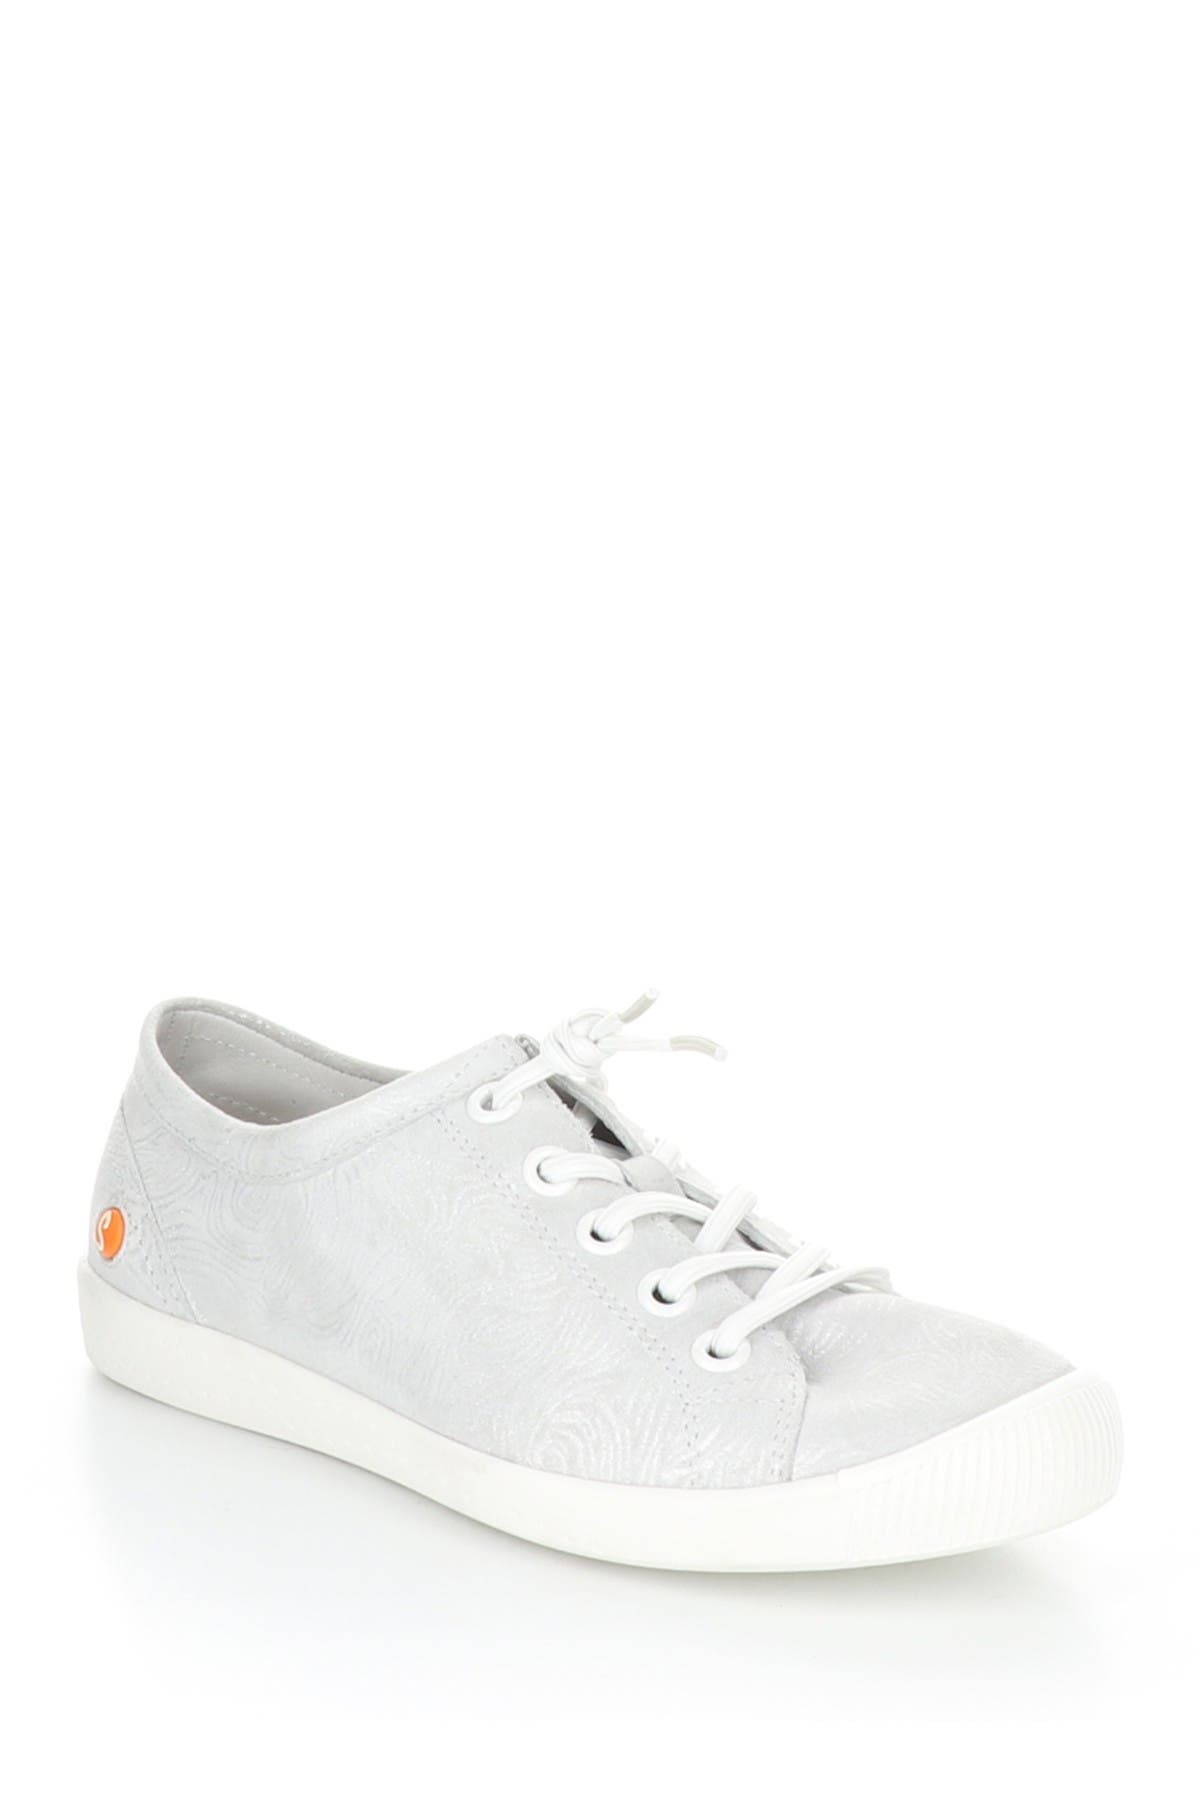 Softinos By Fly London Isla Distressed Sneaker In 012 White Suede Curv